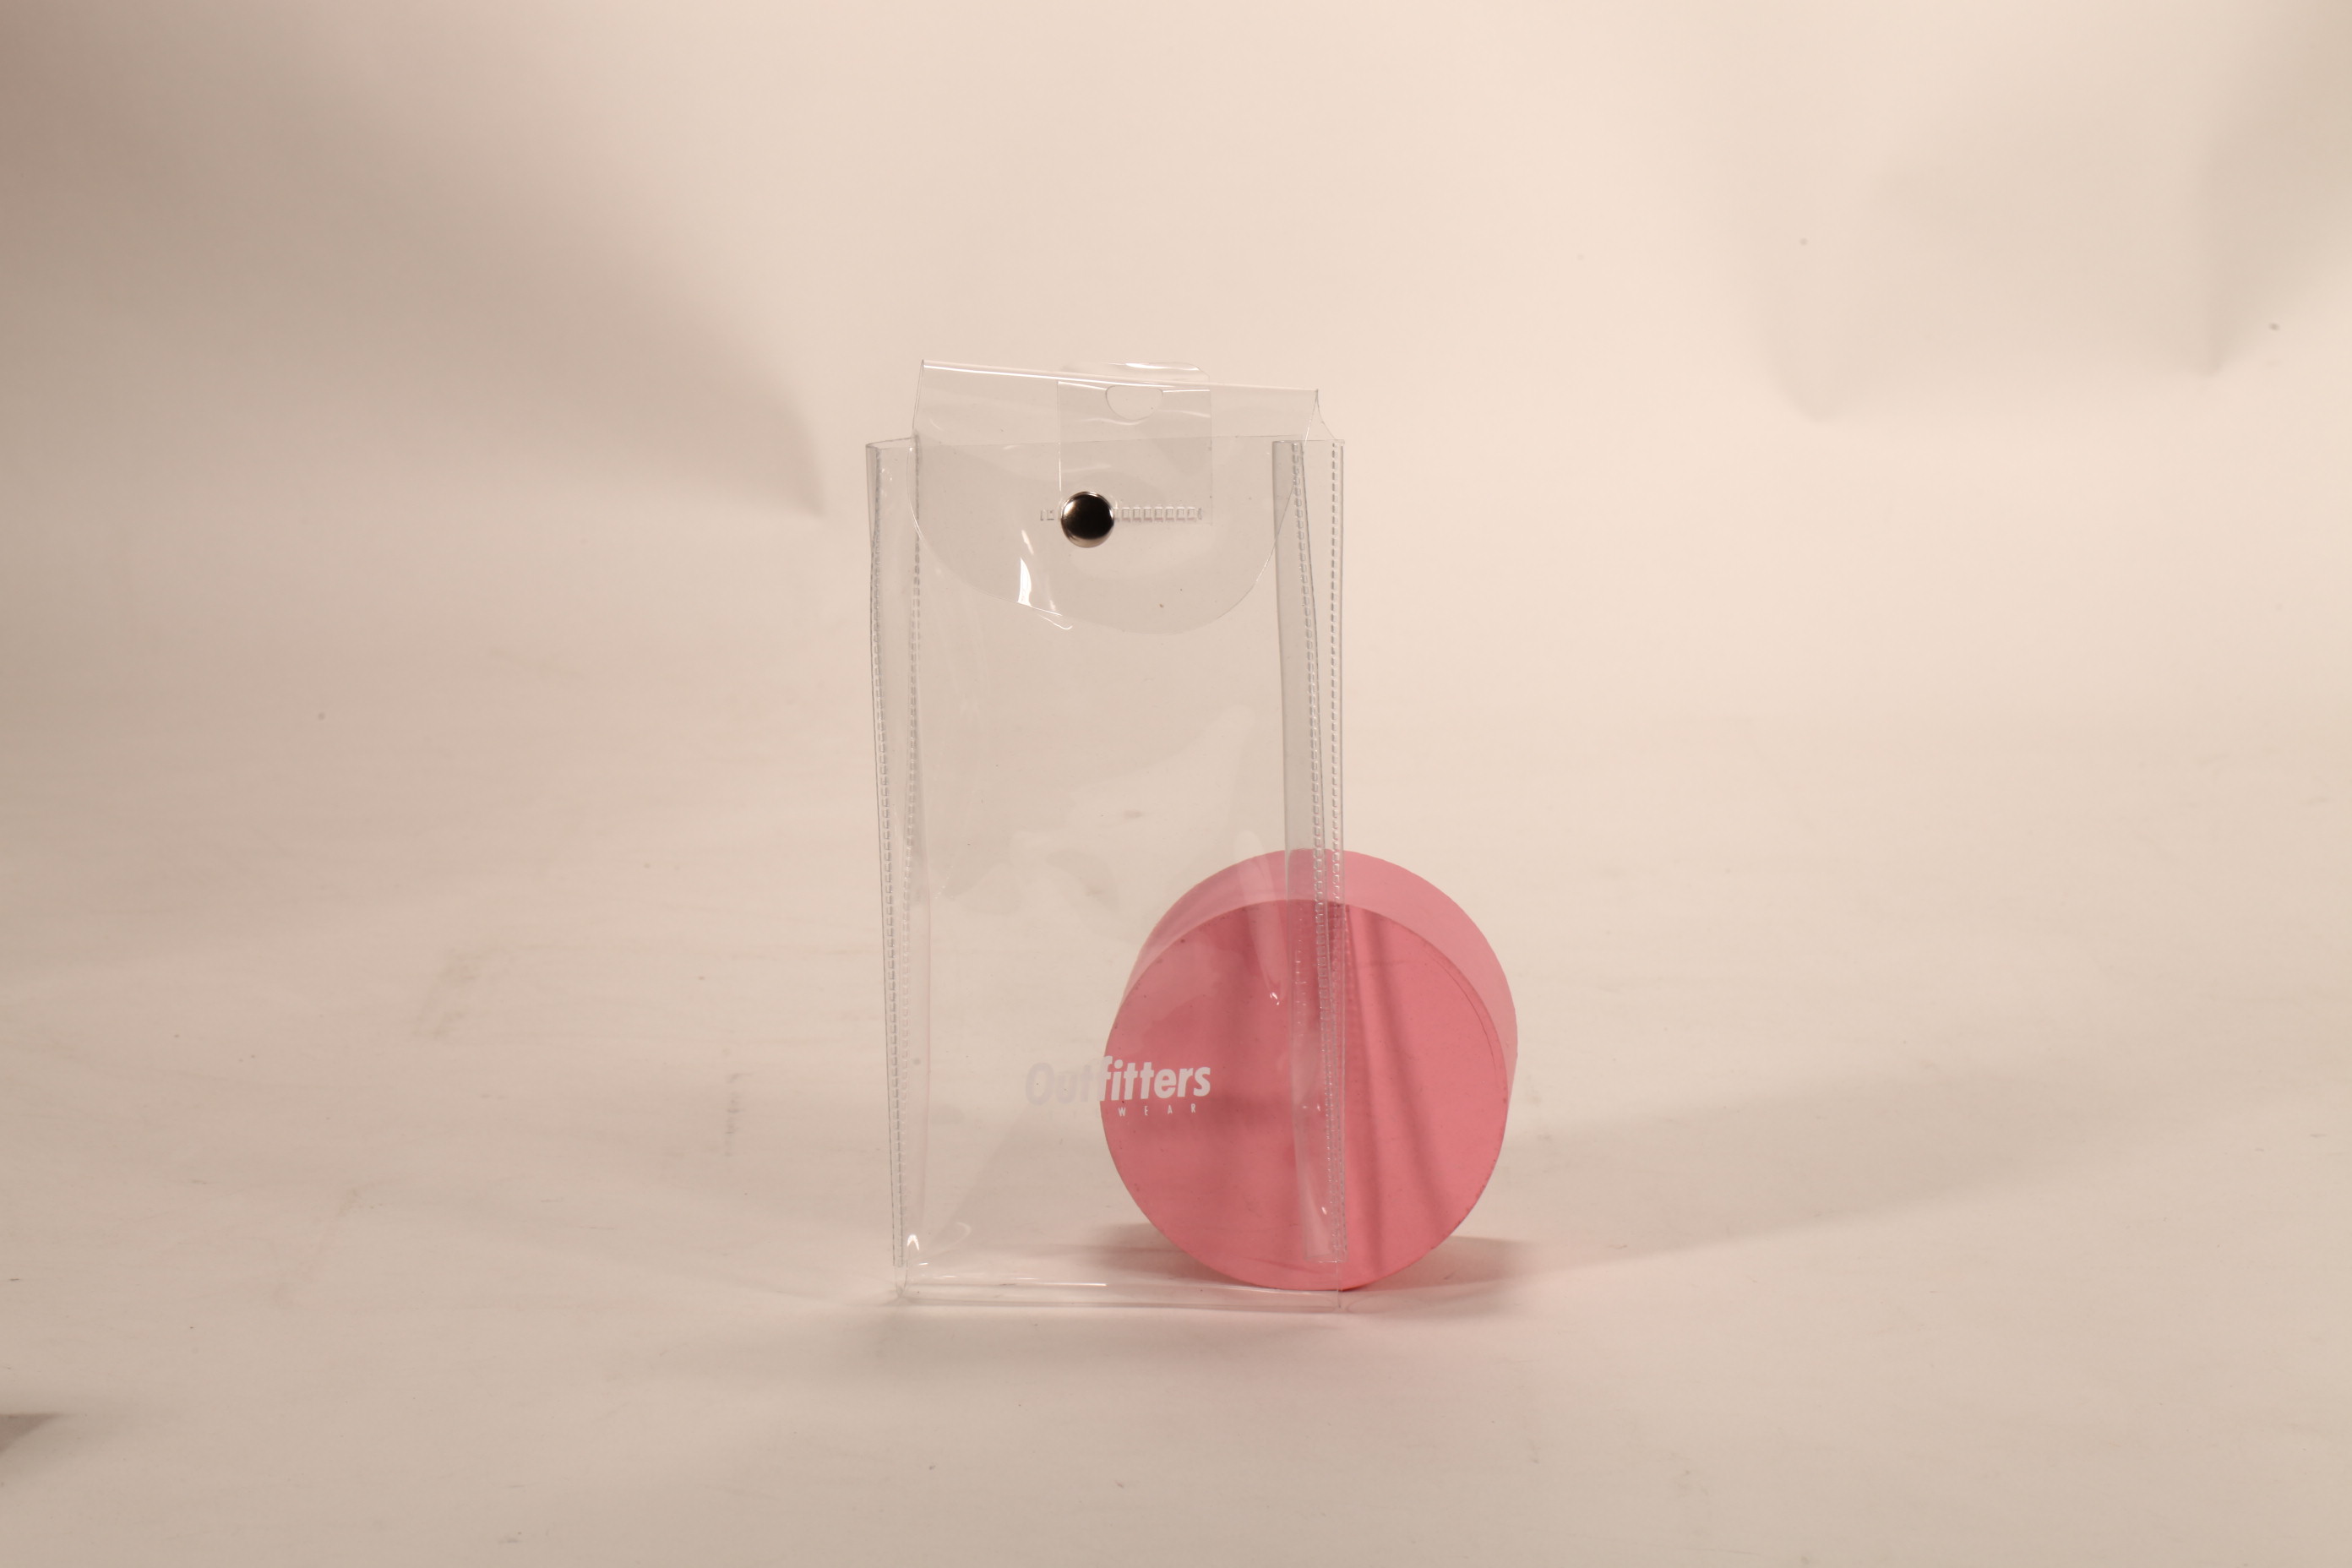 A clear plastic eyewear case with a customizable LOGO